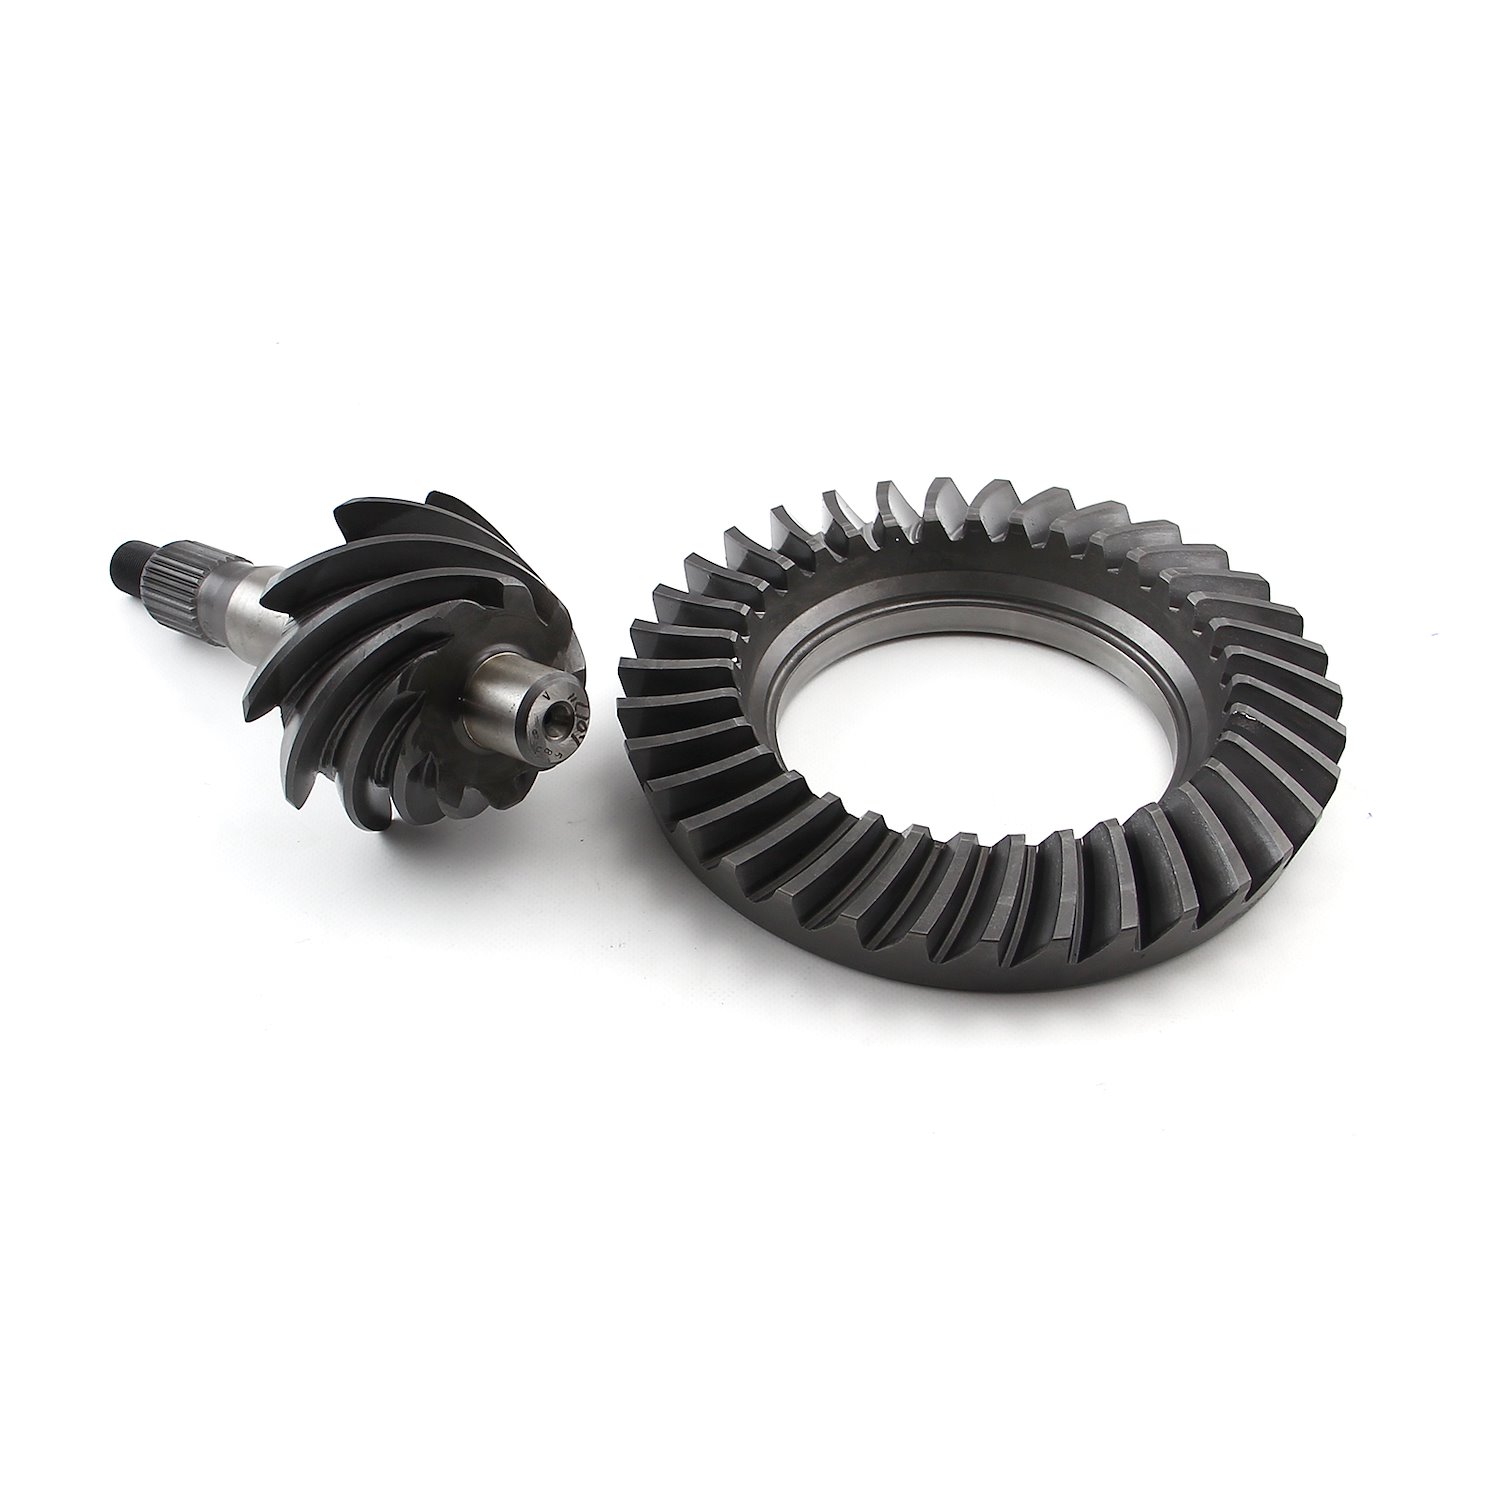 5.14 28 Spline Ford 9 Ring and Pinion Set 8620